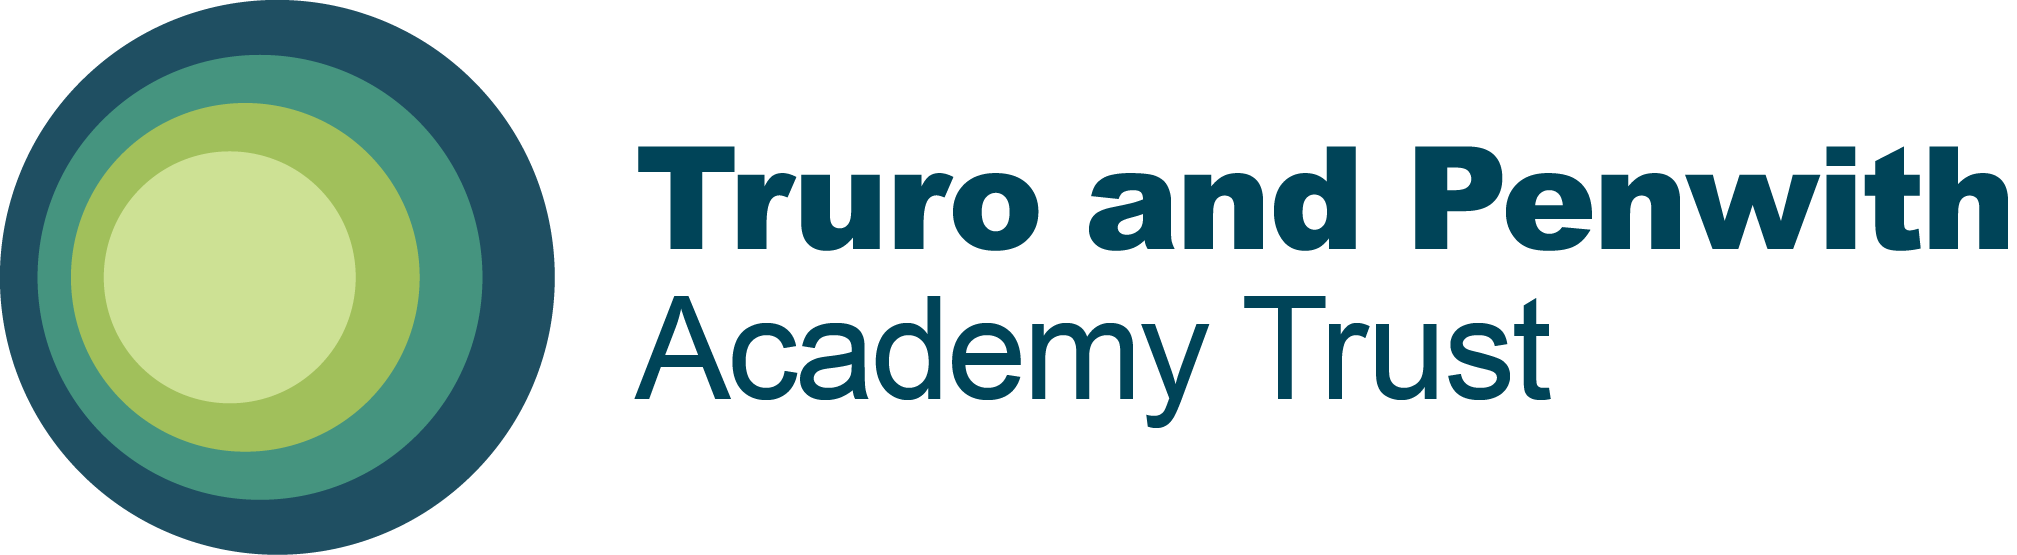 Truro and Penwith Academy Trust logo